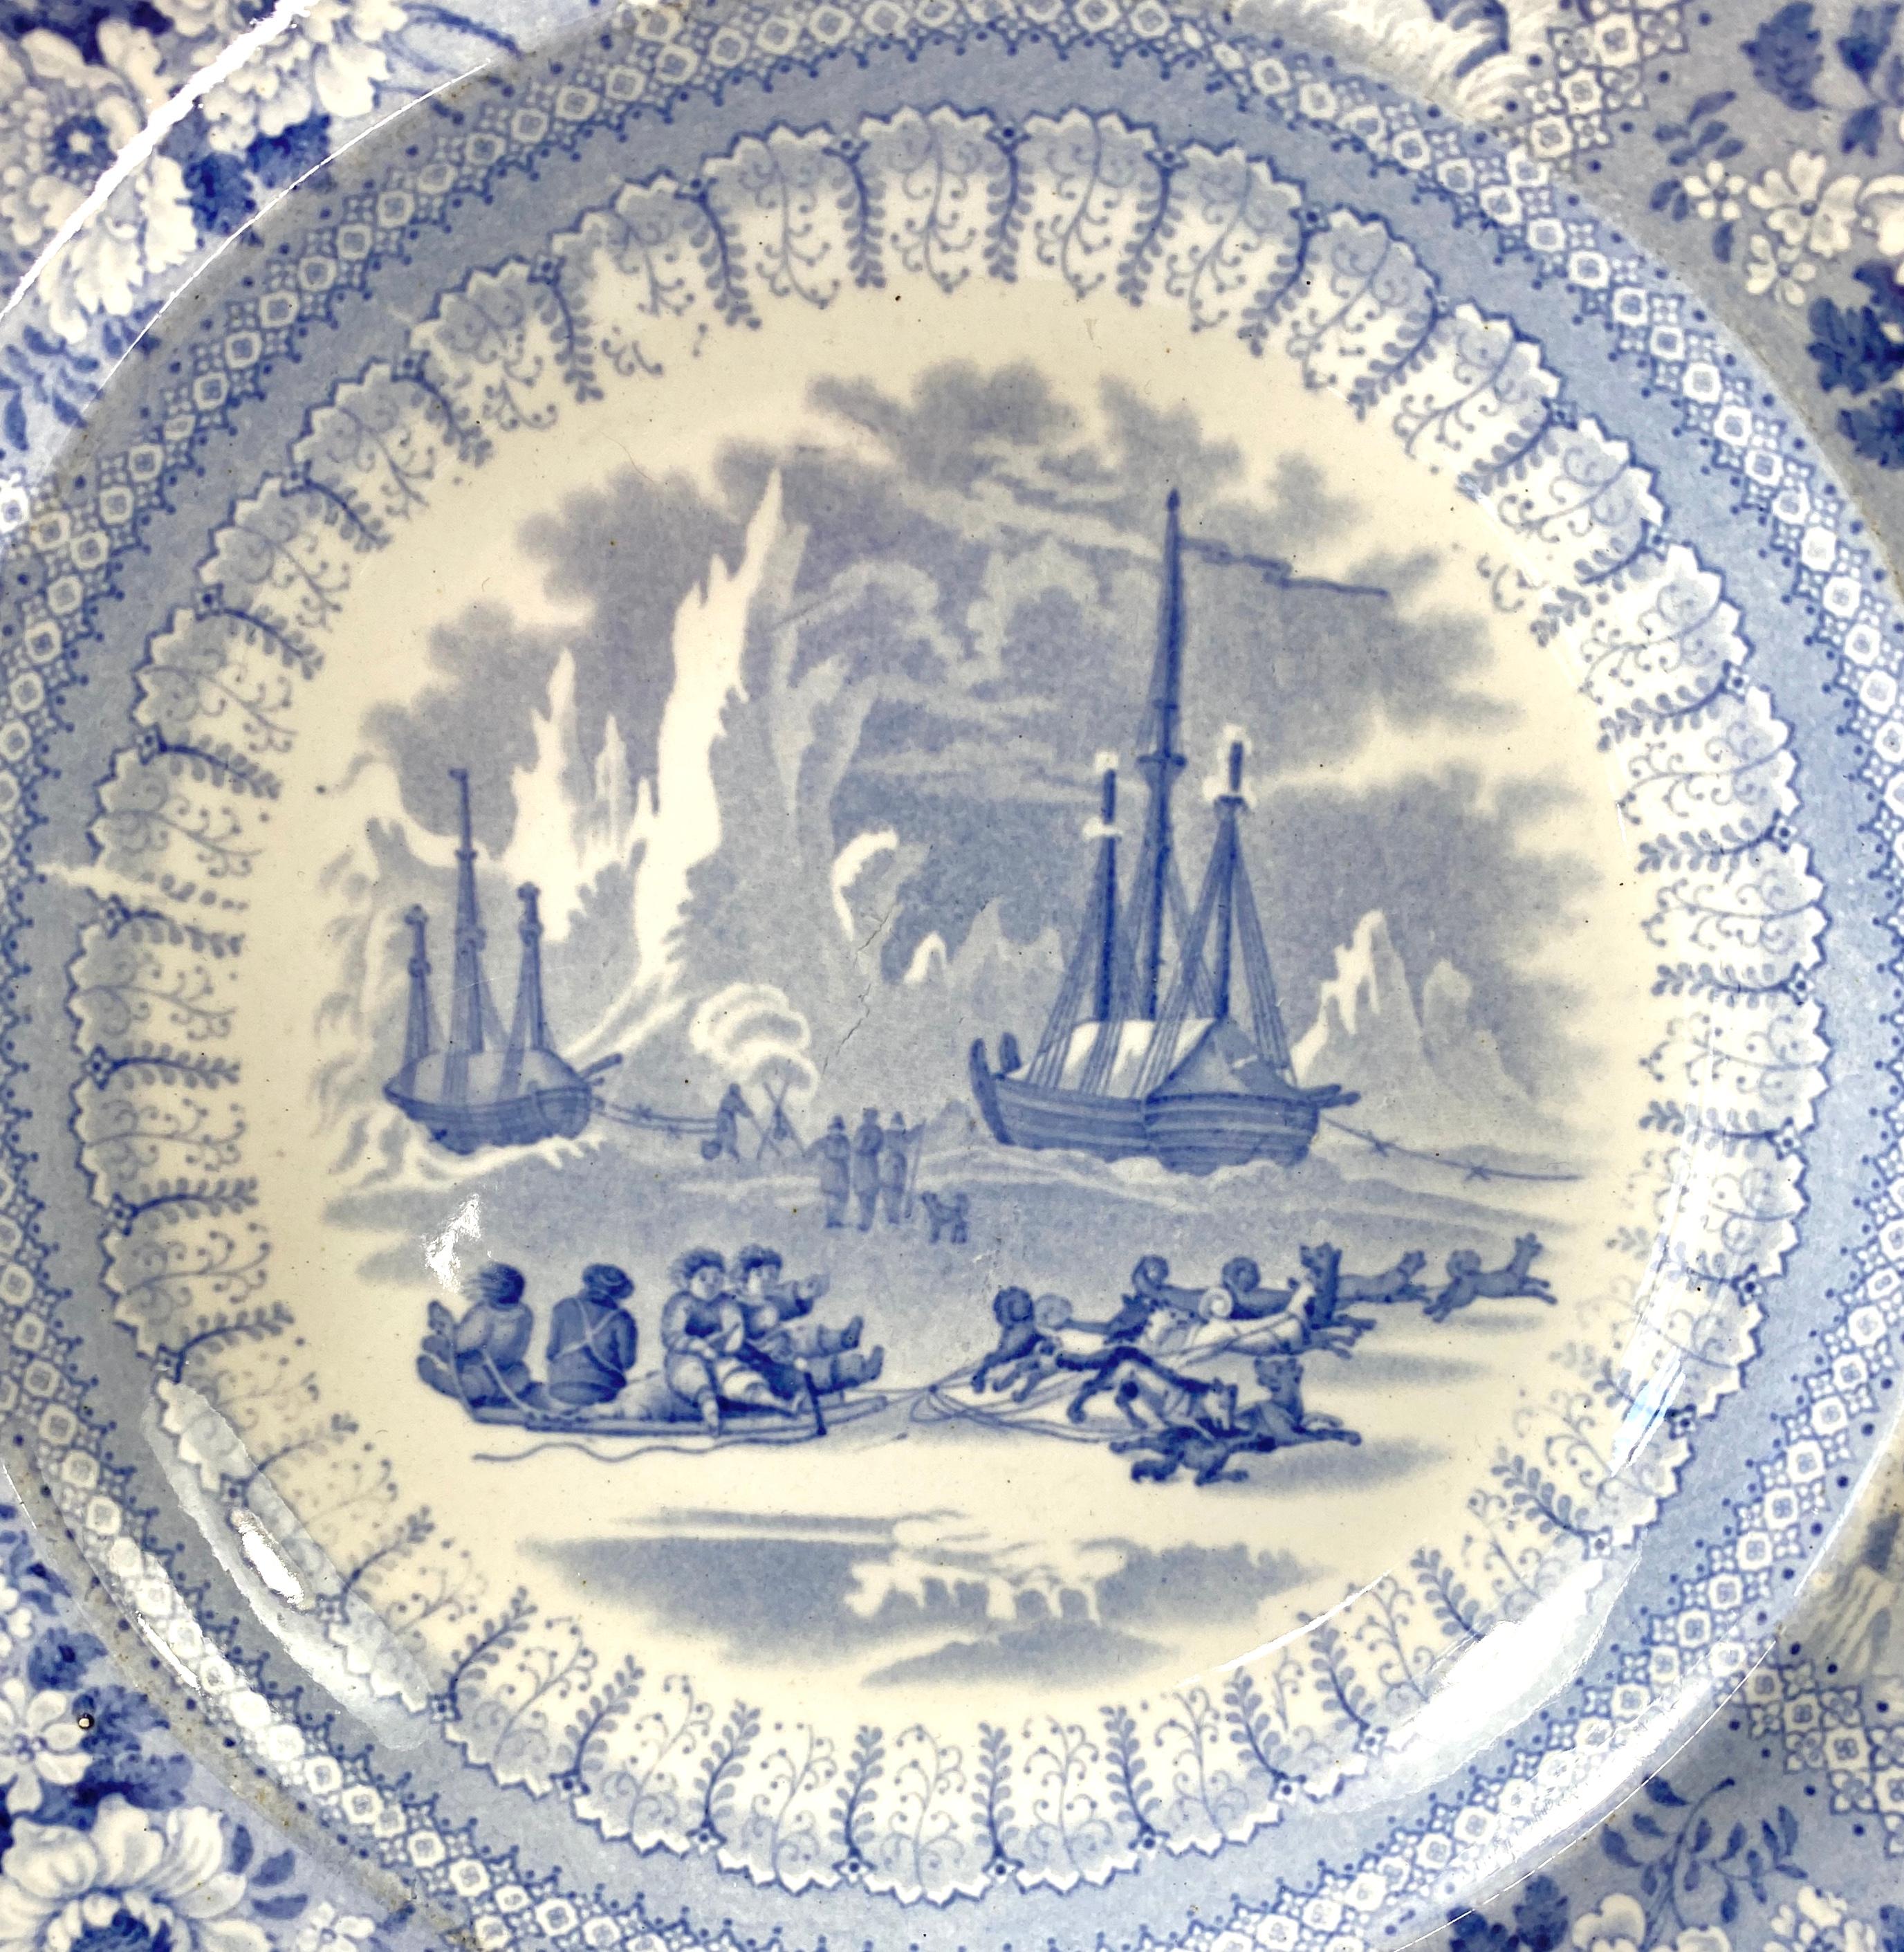 Staffordshire pottery ‘Arctic Scenery’ dish, c. 1835. The Canadian interest dish printed in light blue, with an Arctic scene of explorers on sledges being pulled by dogs, before ships, in a mountainous landscape. The print inspired by the accounts